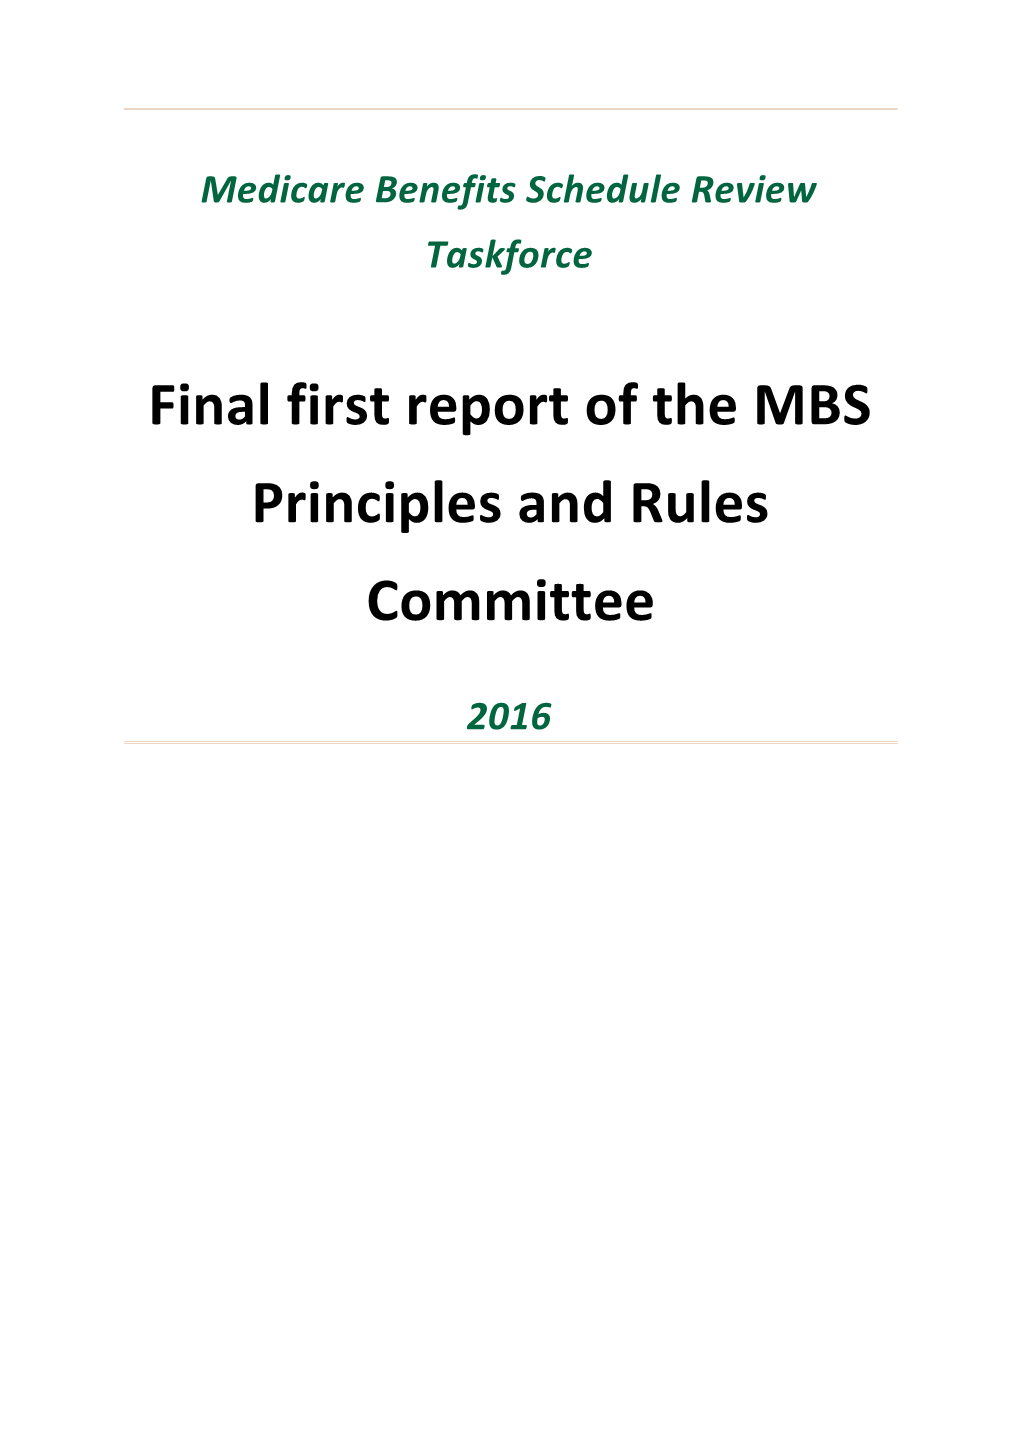 Report from the Principles and Rules Committee